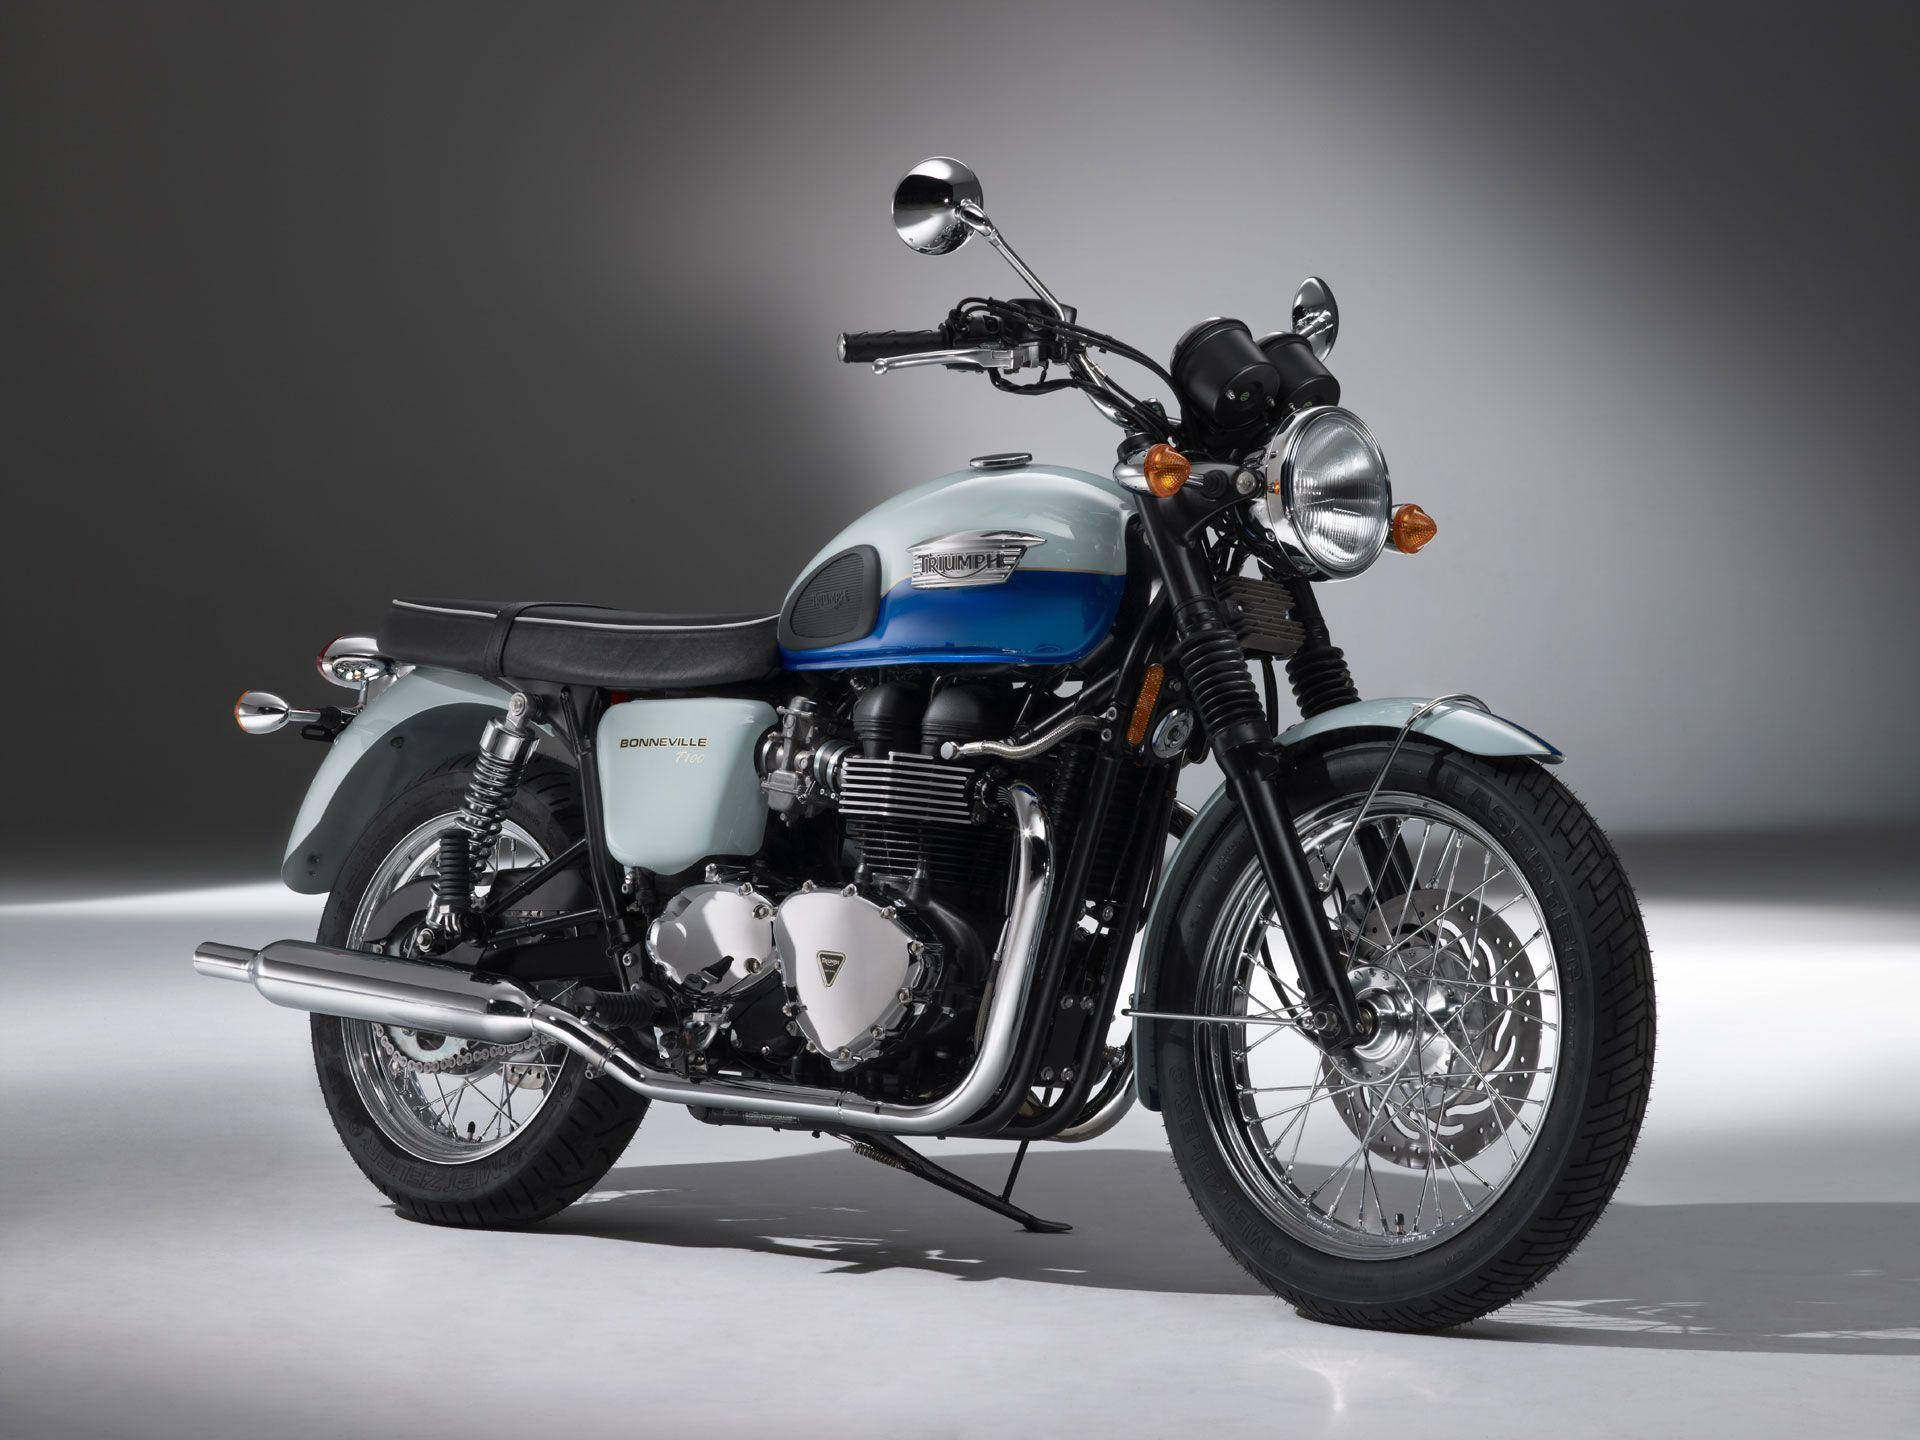 Triumph Bonneville T100 In Stunning Blue - A Classic Reinvented Background